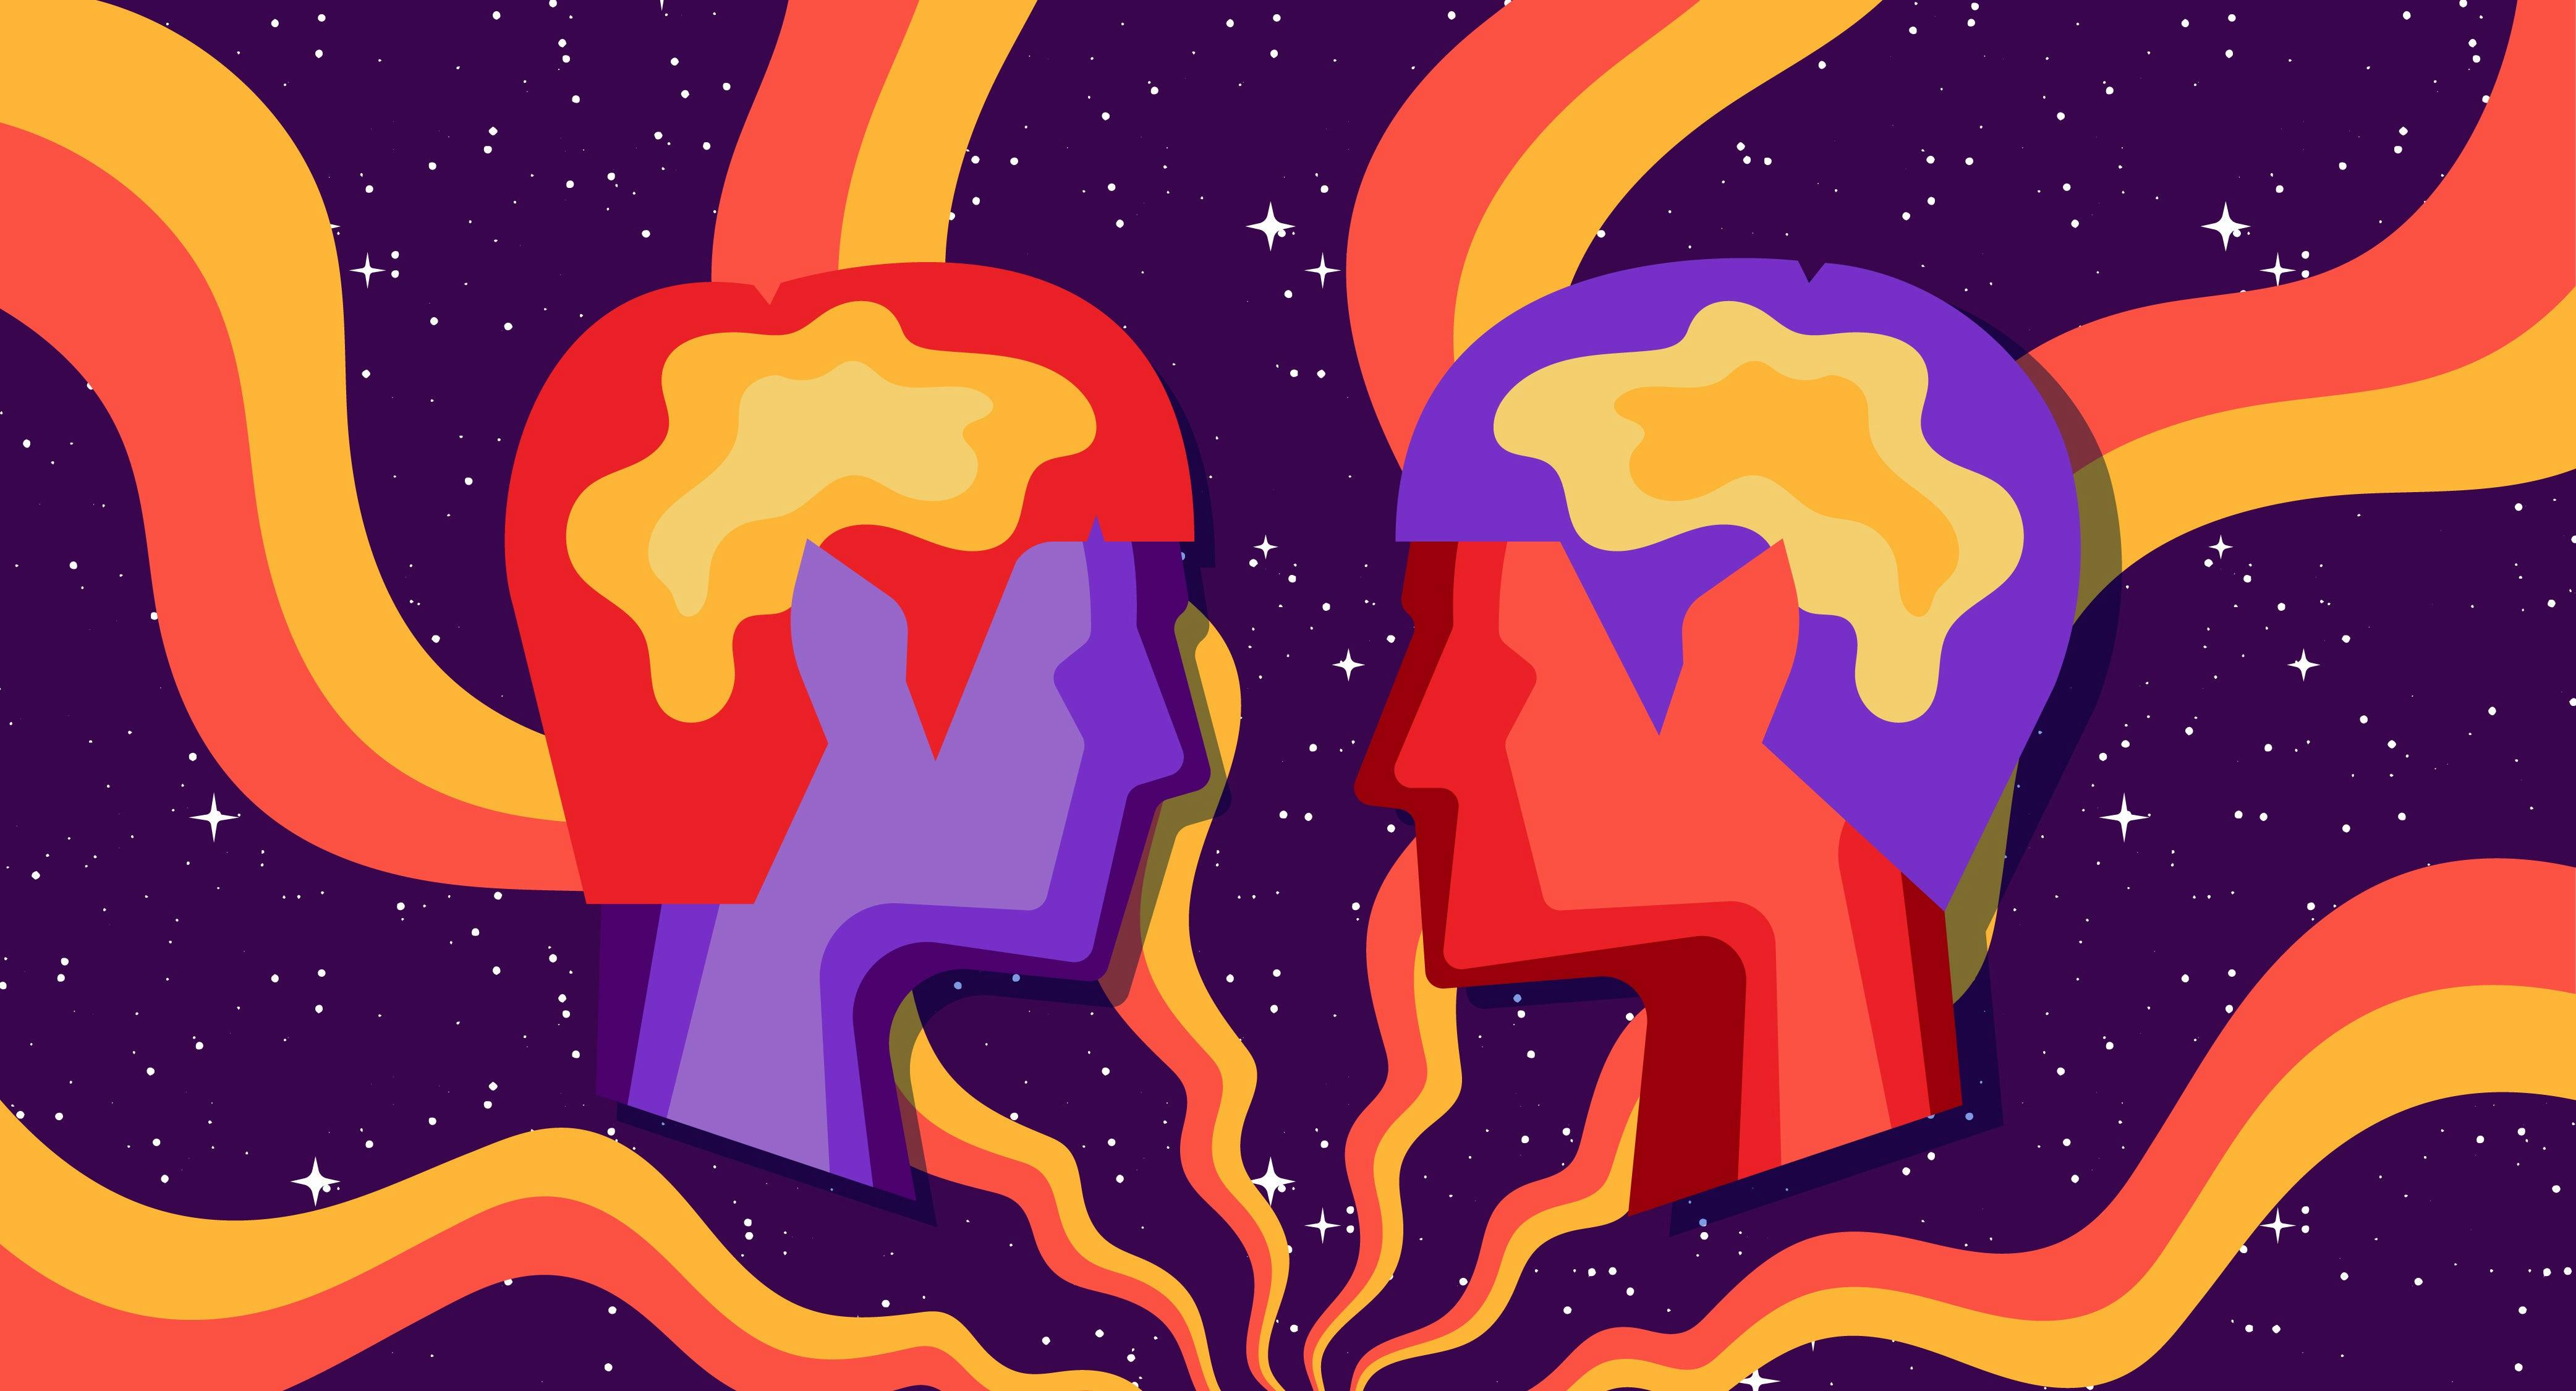 Two illustrated Vulcans face each other on a background of purple, yellow, and orange. Yellow blobs on the Vulcans represent their katras.